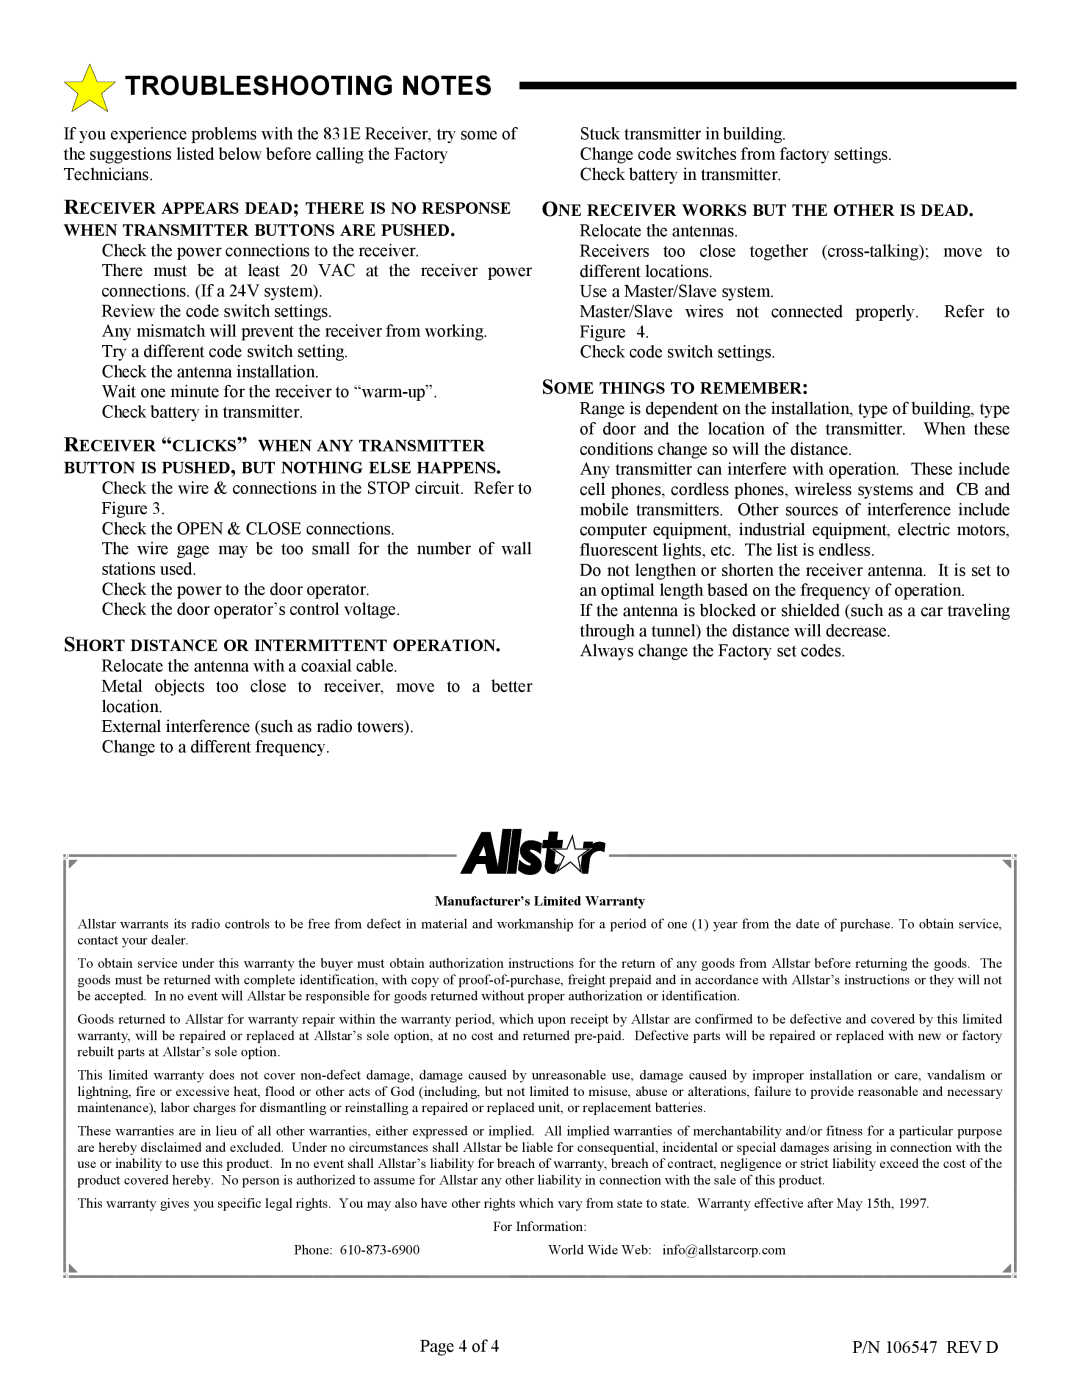 Allstar Products Group 831E Troubleshooting Notes, Short Distance Or Intermittent Operation, Some Things To Remember 